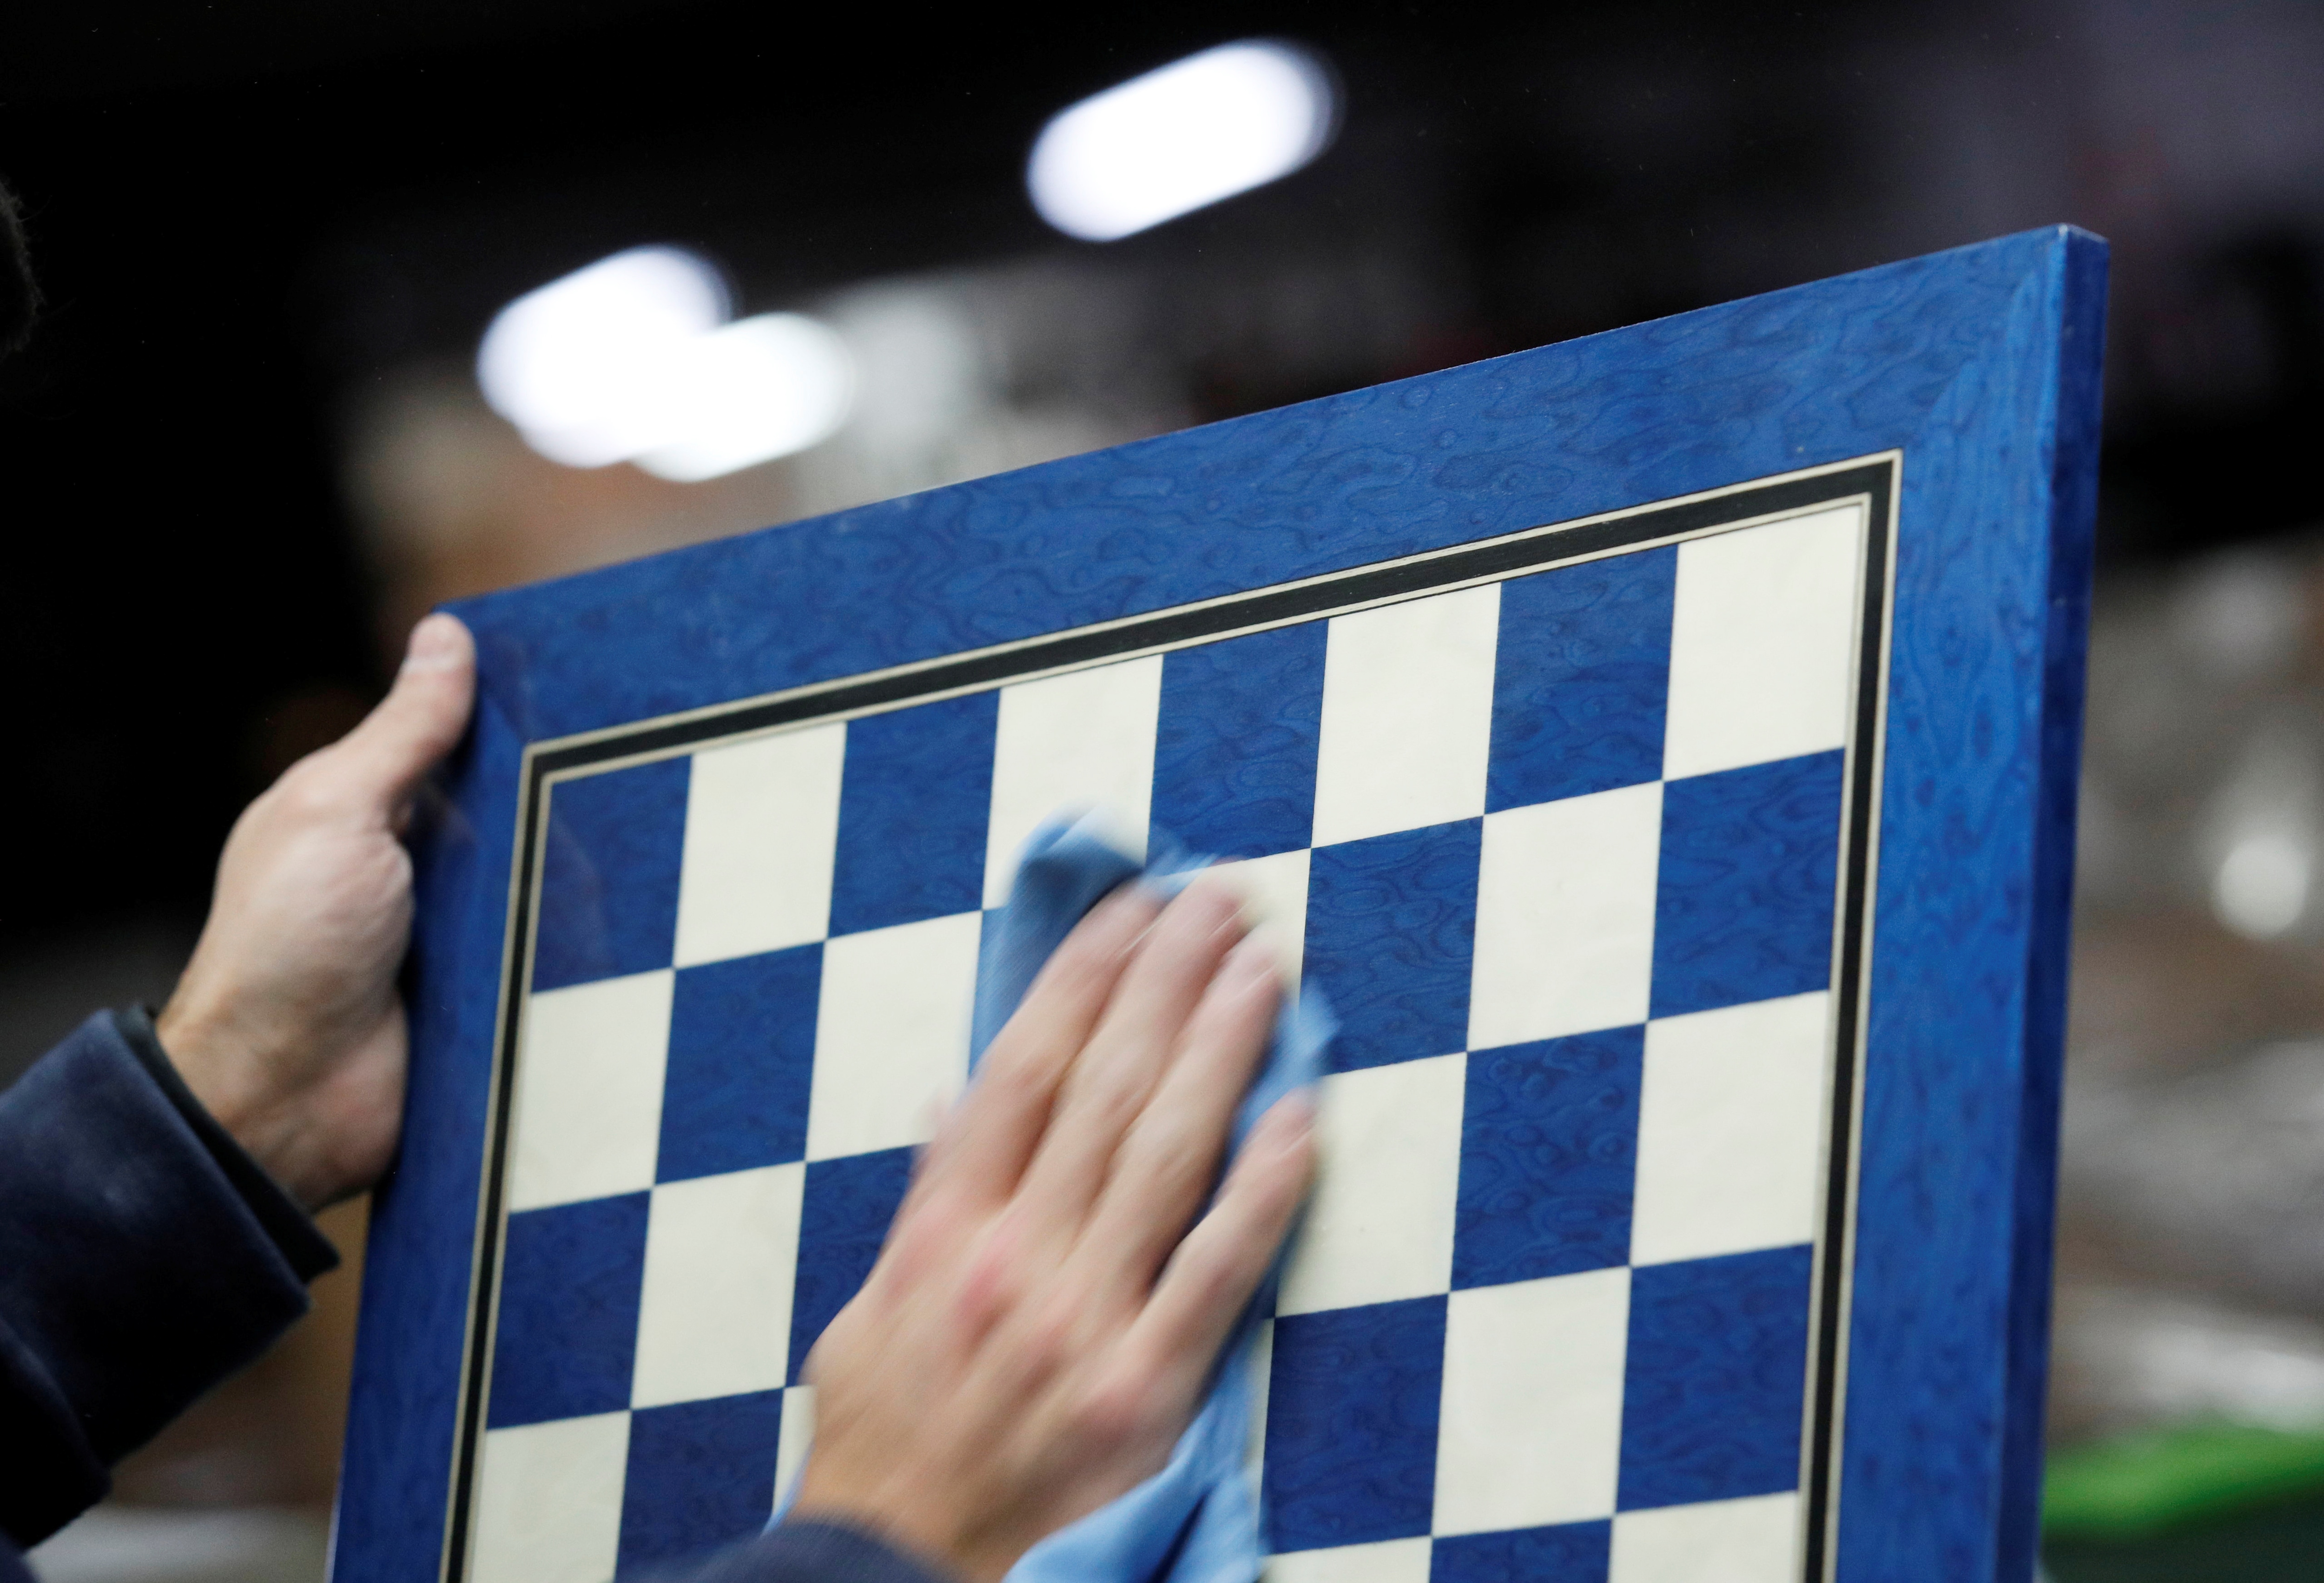 Spanish Chess Board Sales Soar after 'Queen's Gambit' Cameo